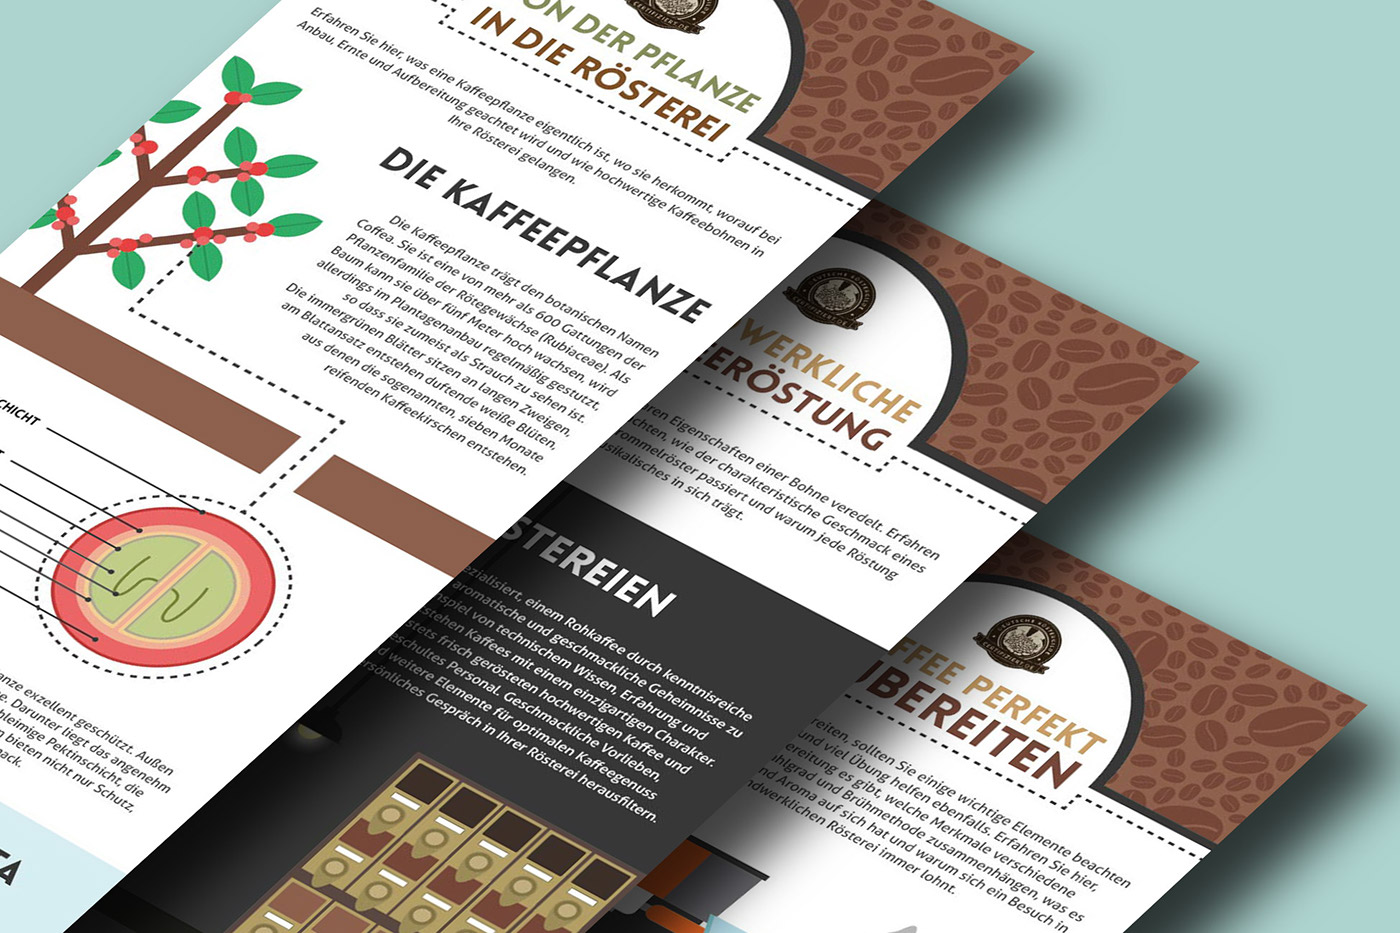 Coffee Roaster hand-roasted book leaflet infographic Booklet ILLUSTRATION  Coffee lovers hand-roasted coffee